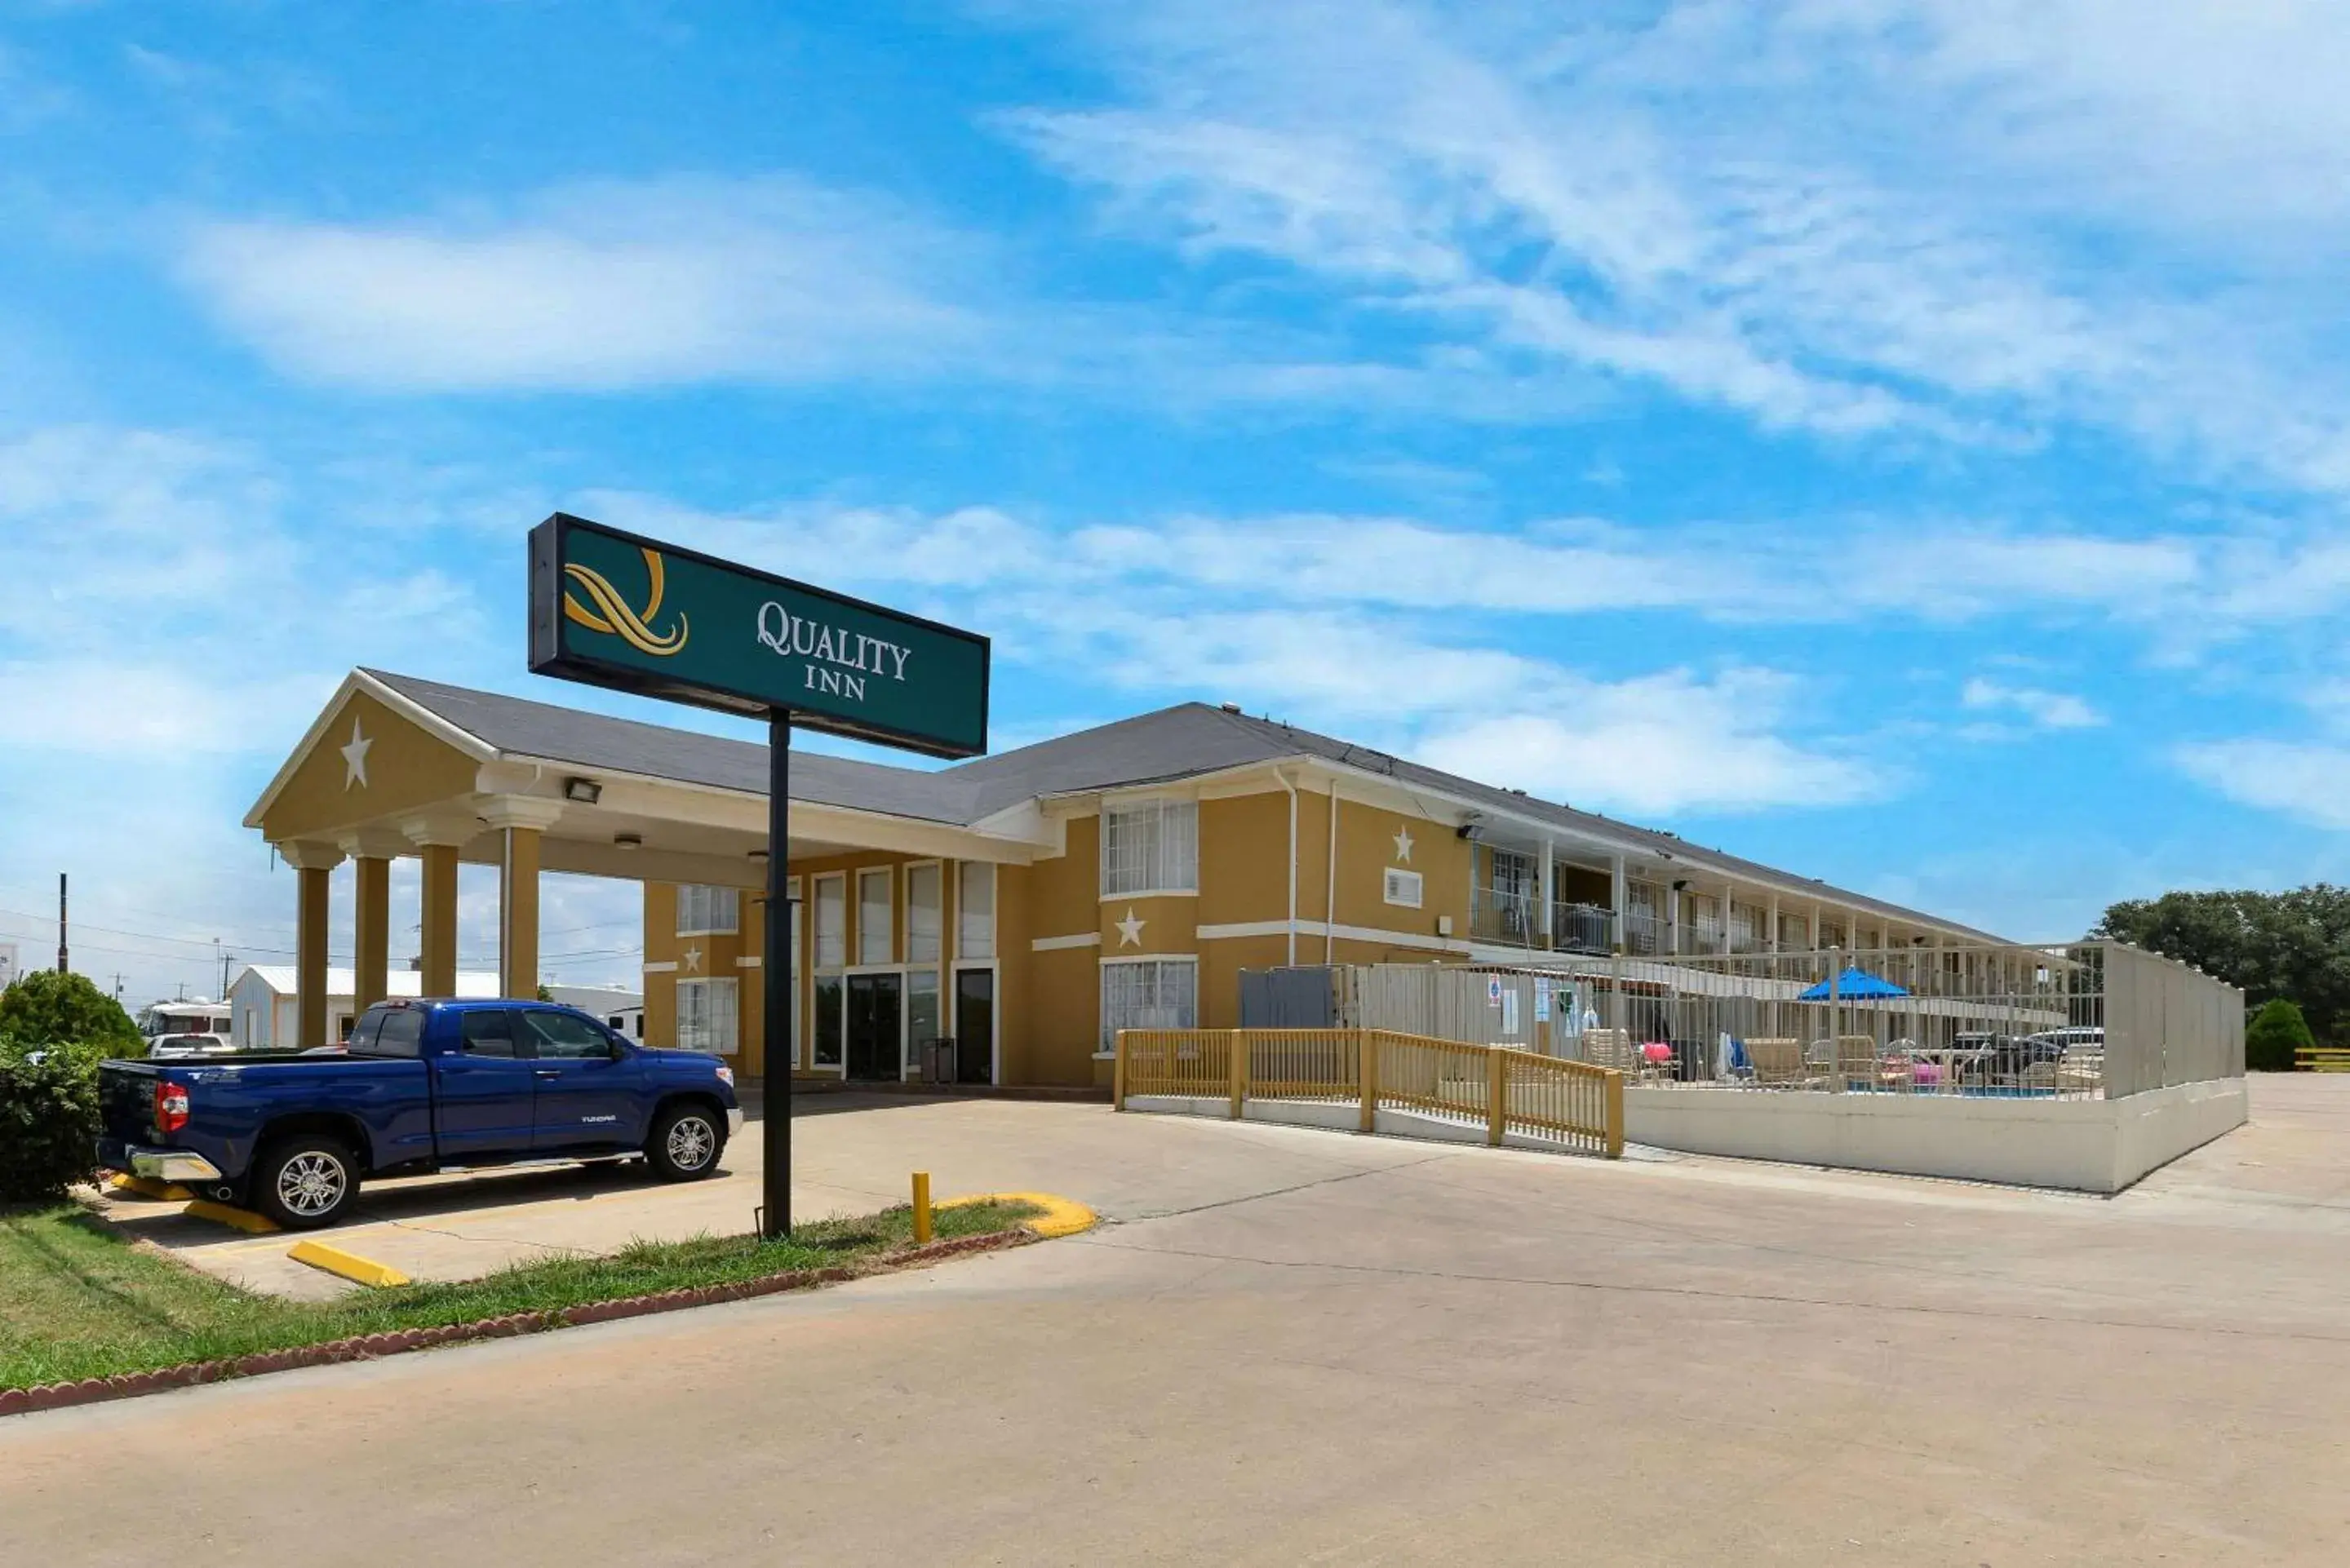 Property building in Quality Inn Gonzales